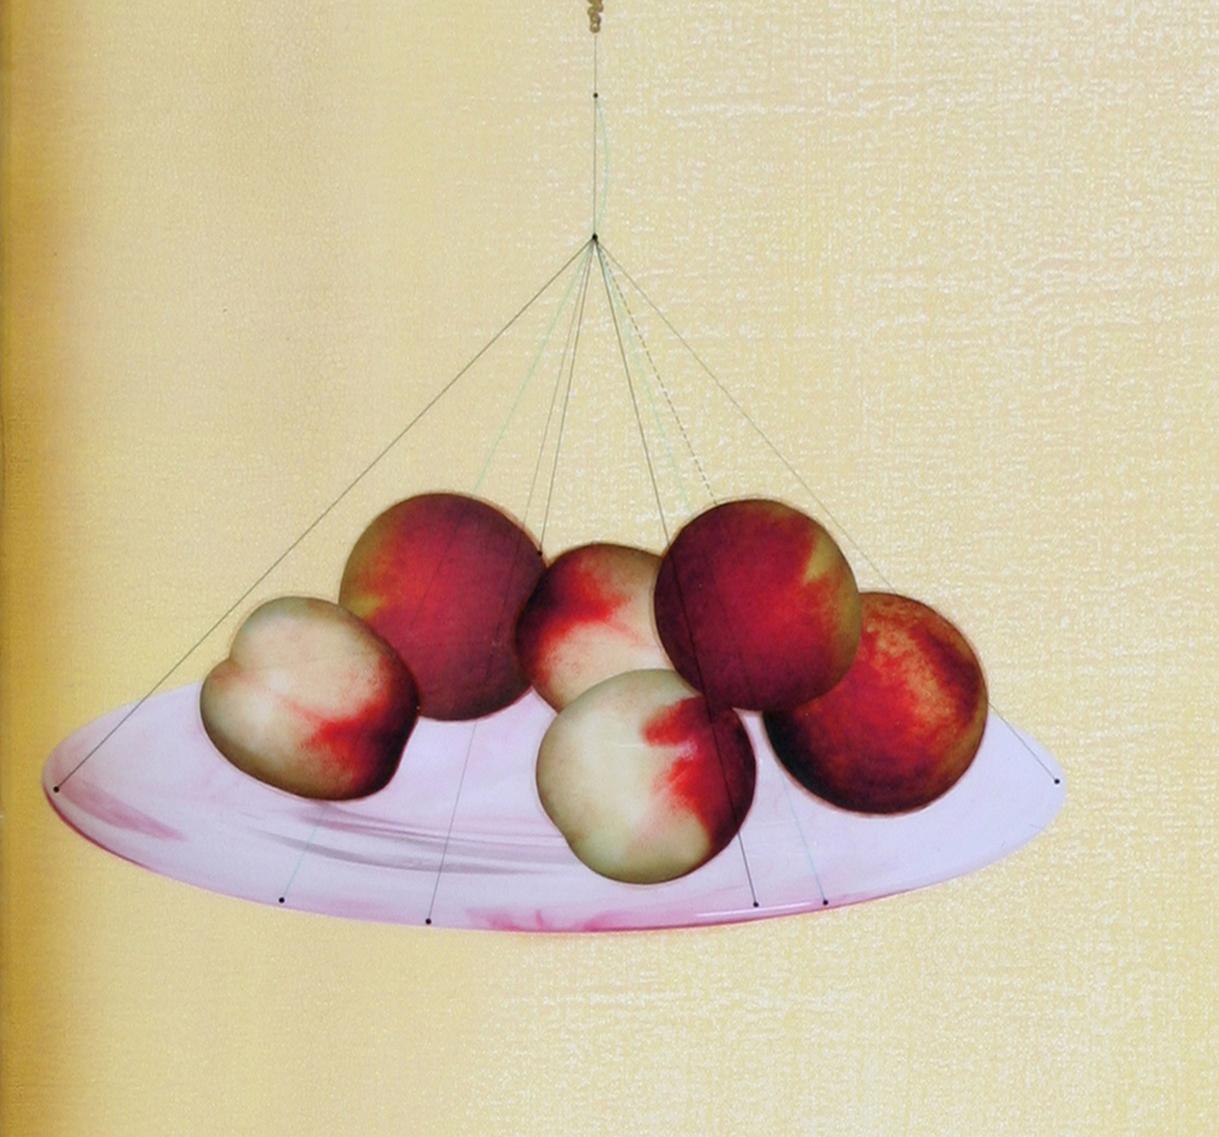 Peach, Grape and Chandelier - Painting by Kaoru Mansour